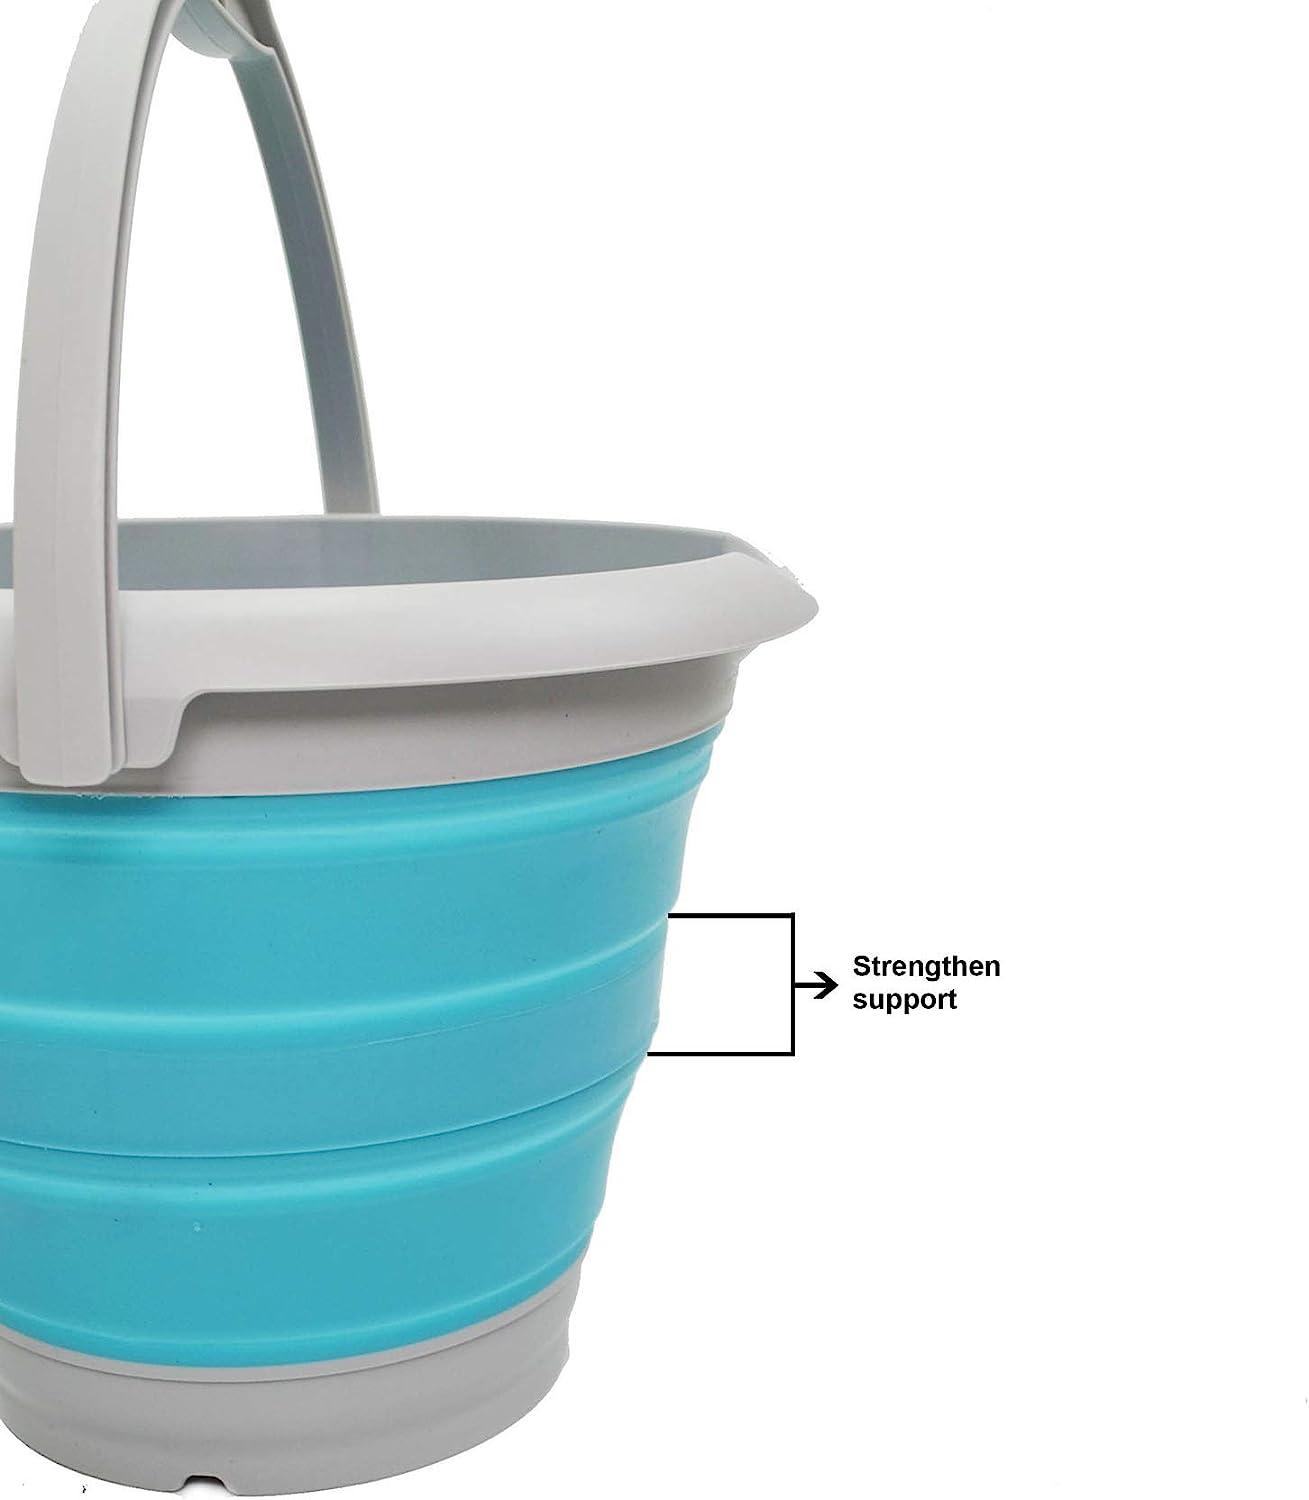 Portable Handled Collapsible Pail Buckets